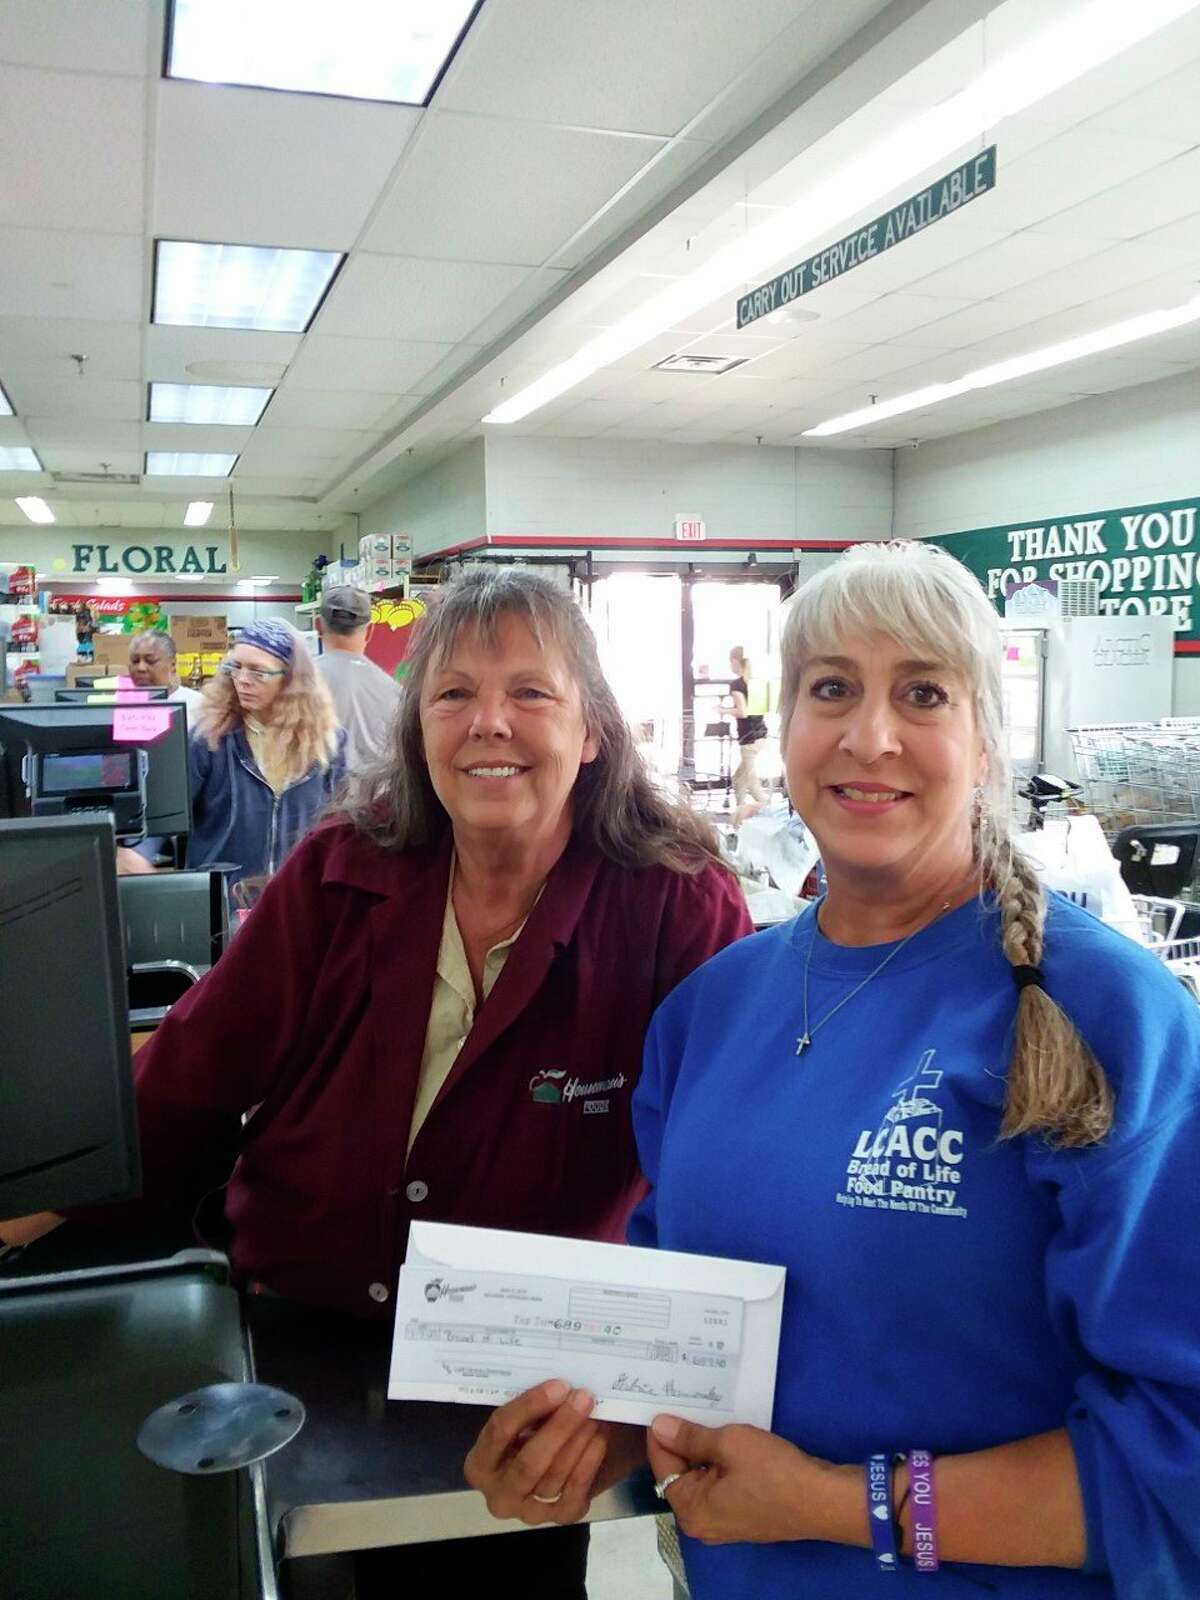 Bread of Life Pantry director, Lynne Mills (right) accepts a donation check for $689.40 from Houseman's Food employee Marlene Schofield (left). Schofield collect the most donations during the Dollar at Checkout campaign over the July 4 weekend. (Submitted photo) 